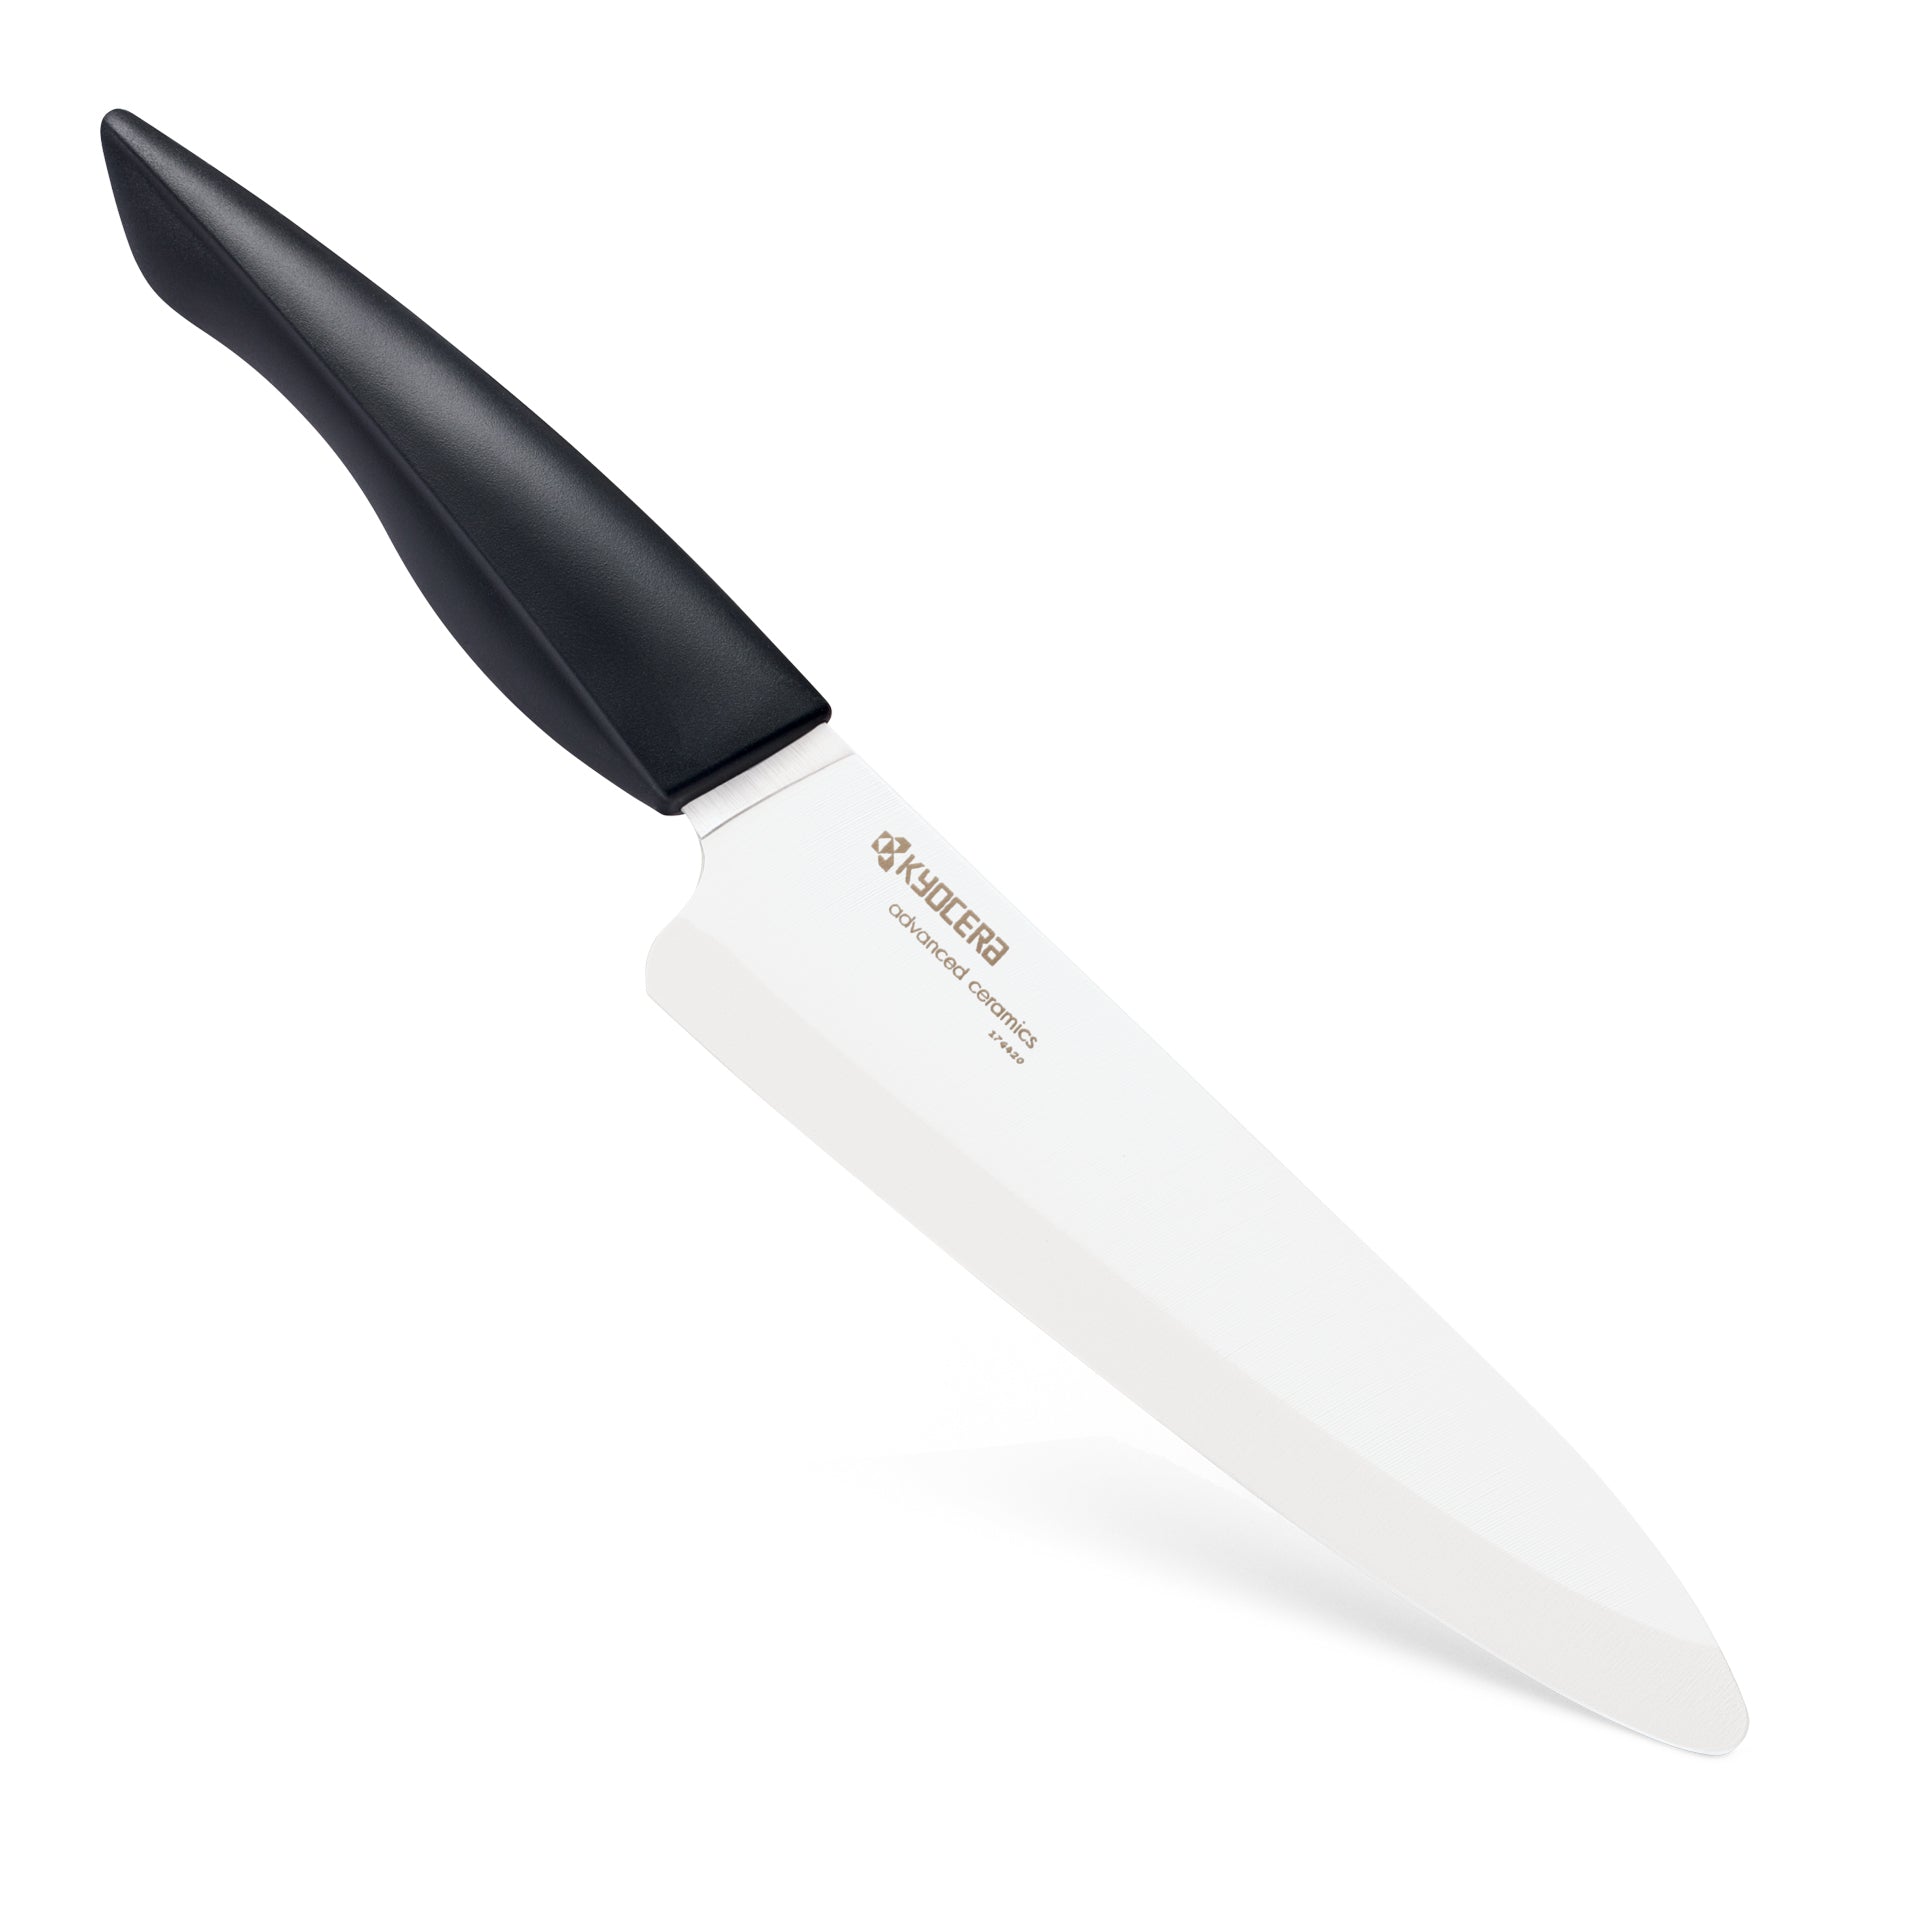 Kyocera Knife Professional Chef S 7 Inch Blade